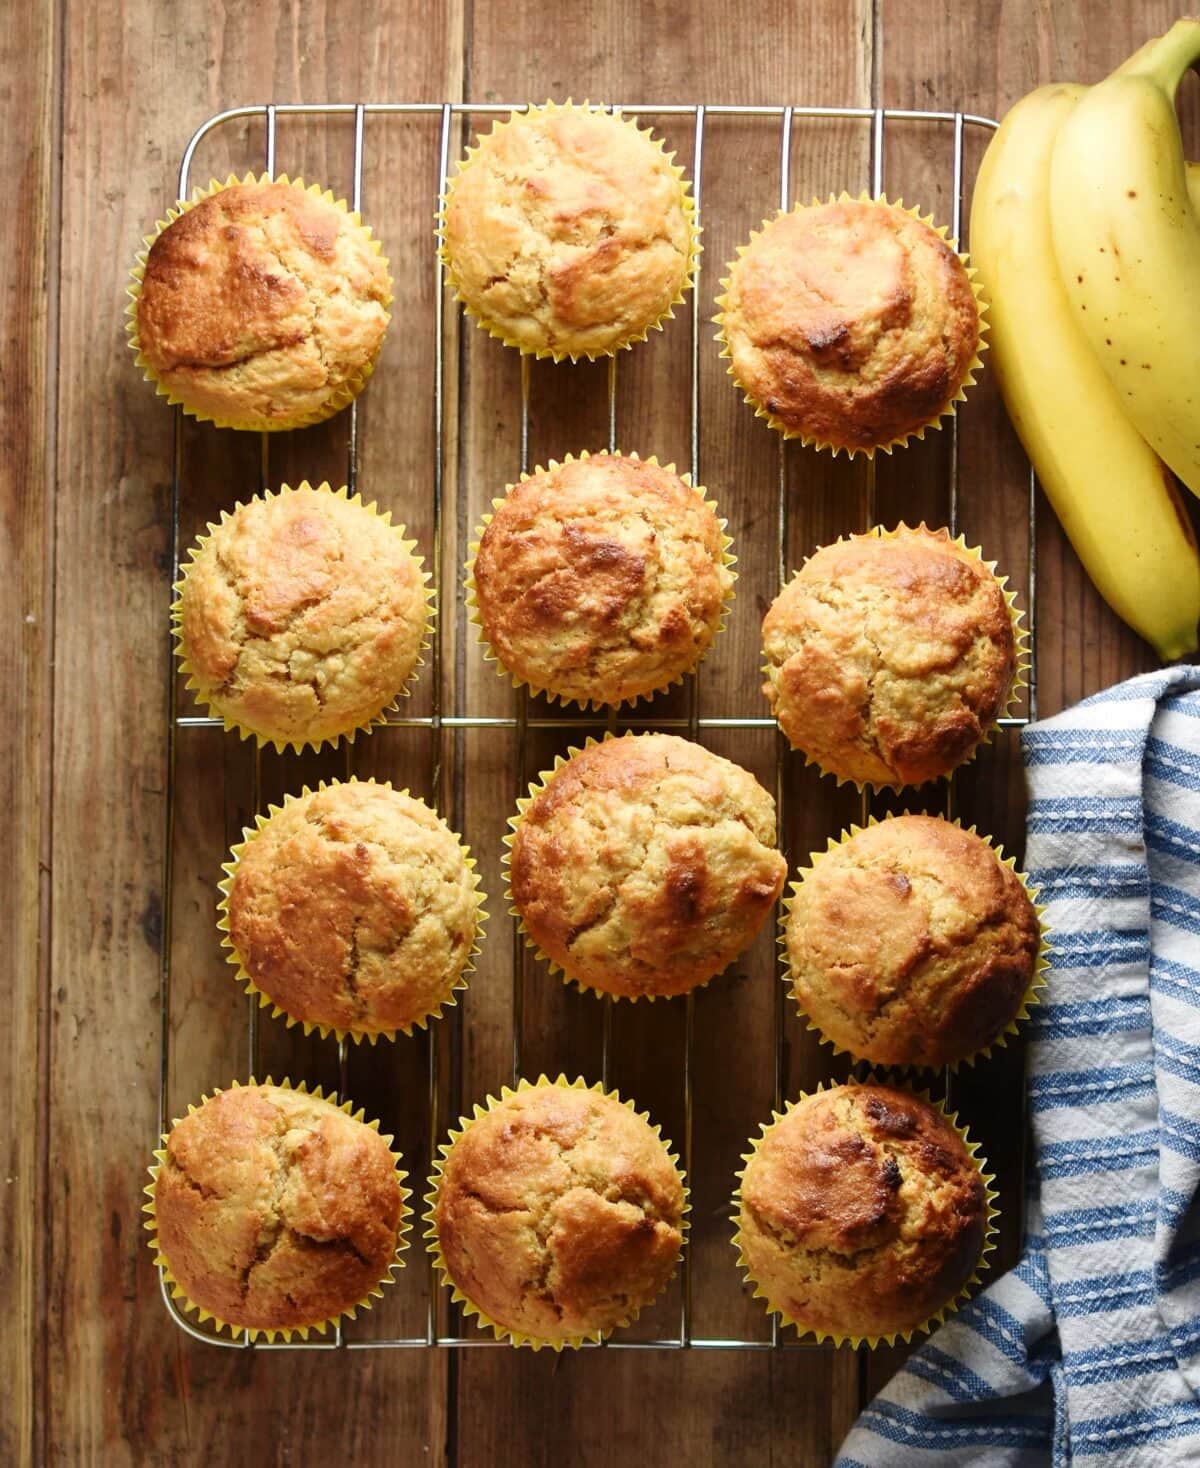 Top down view of banana muffins on top of cooling rack with bananas in top right corner and stripy blue-and-white cloth to the right.